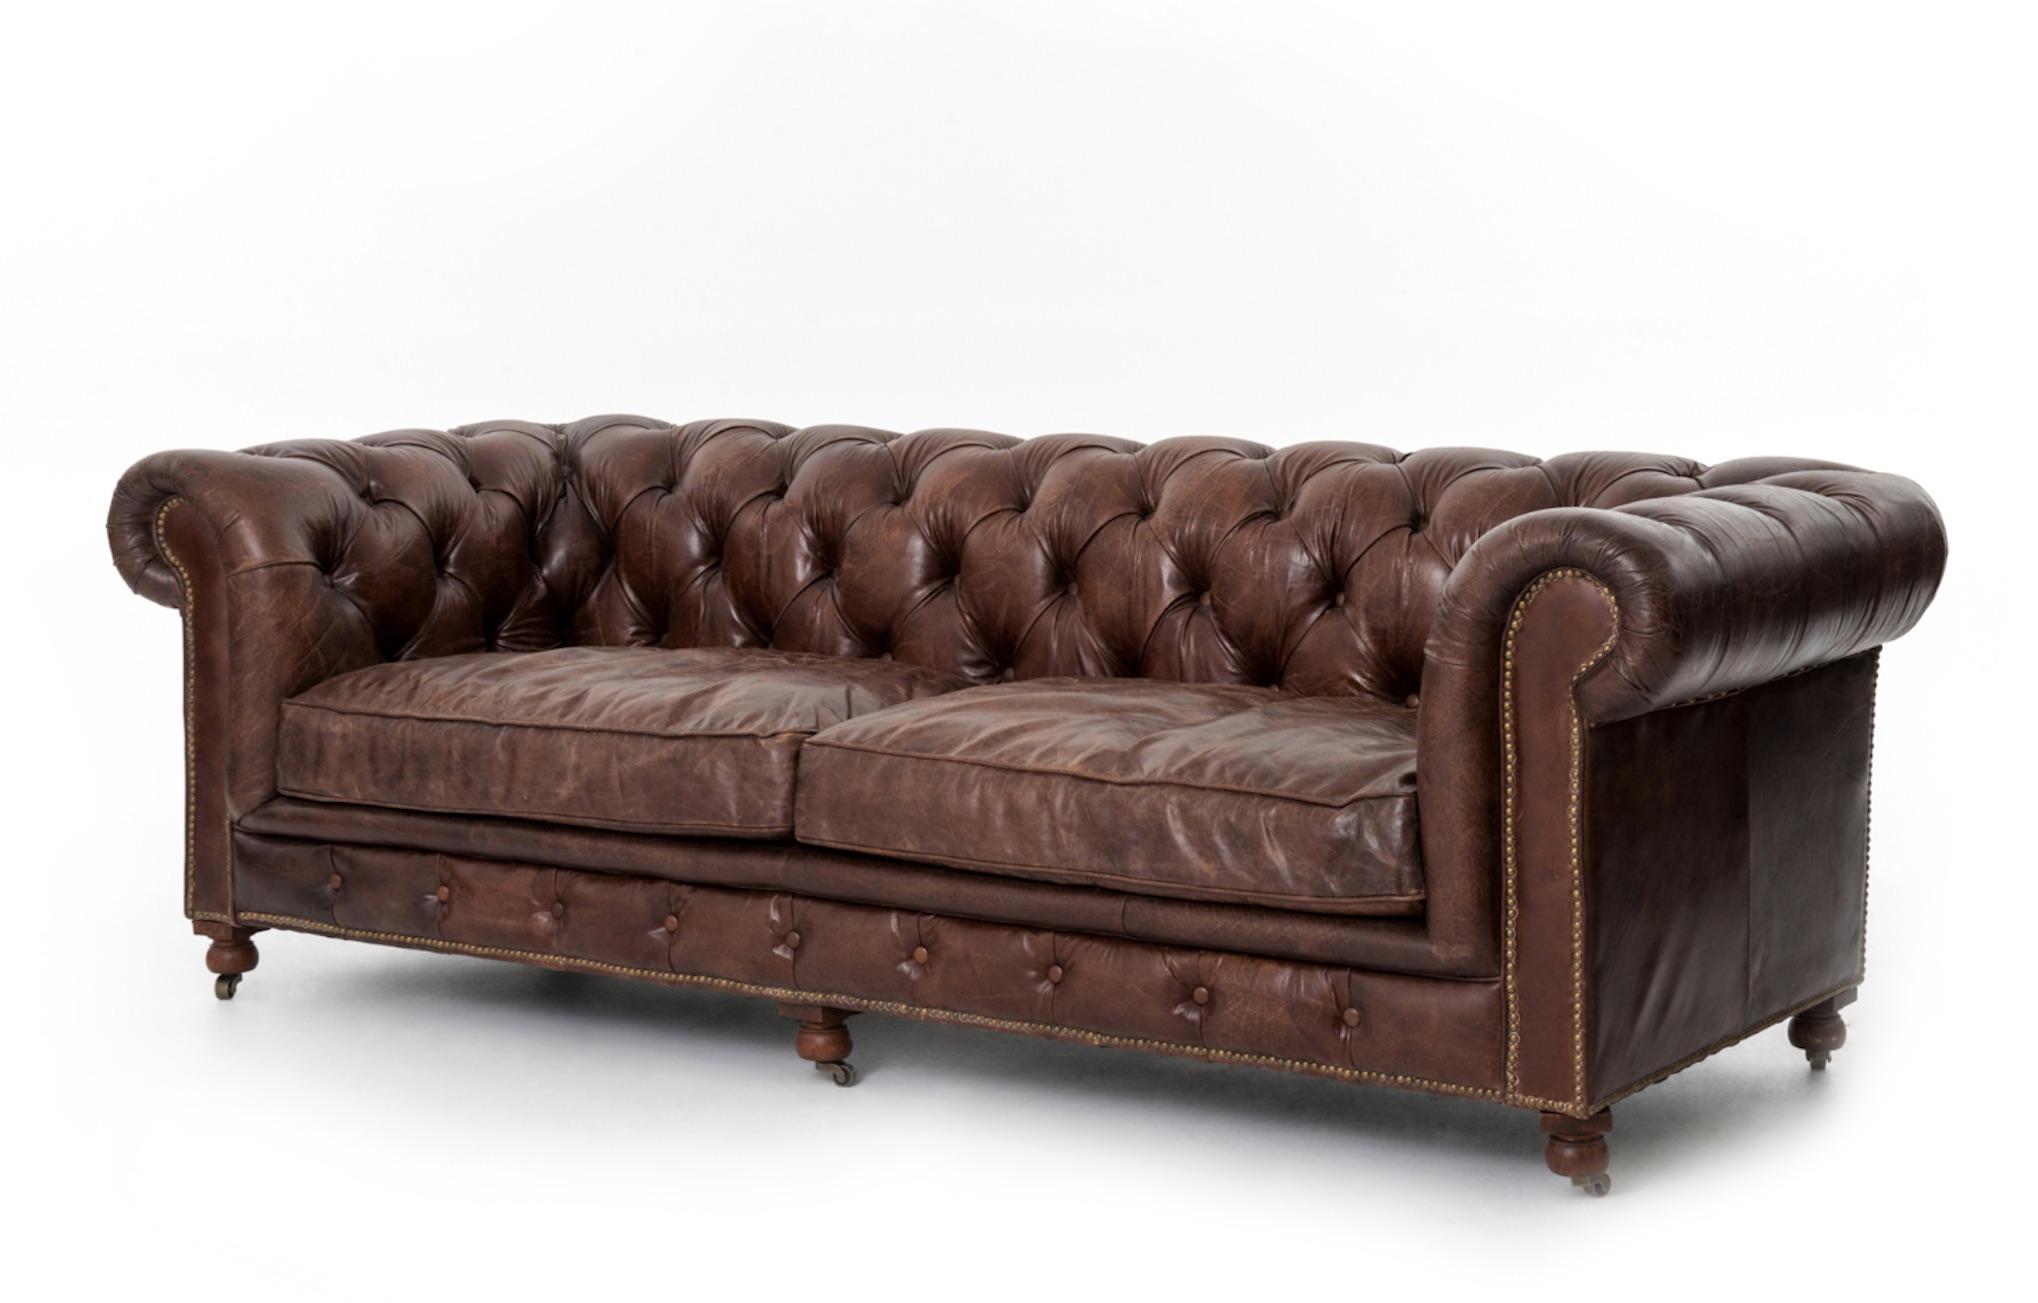 Pair of Monumental Distressed Leather Chesterfield Sofas. Priced Per Sofa. 8